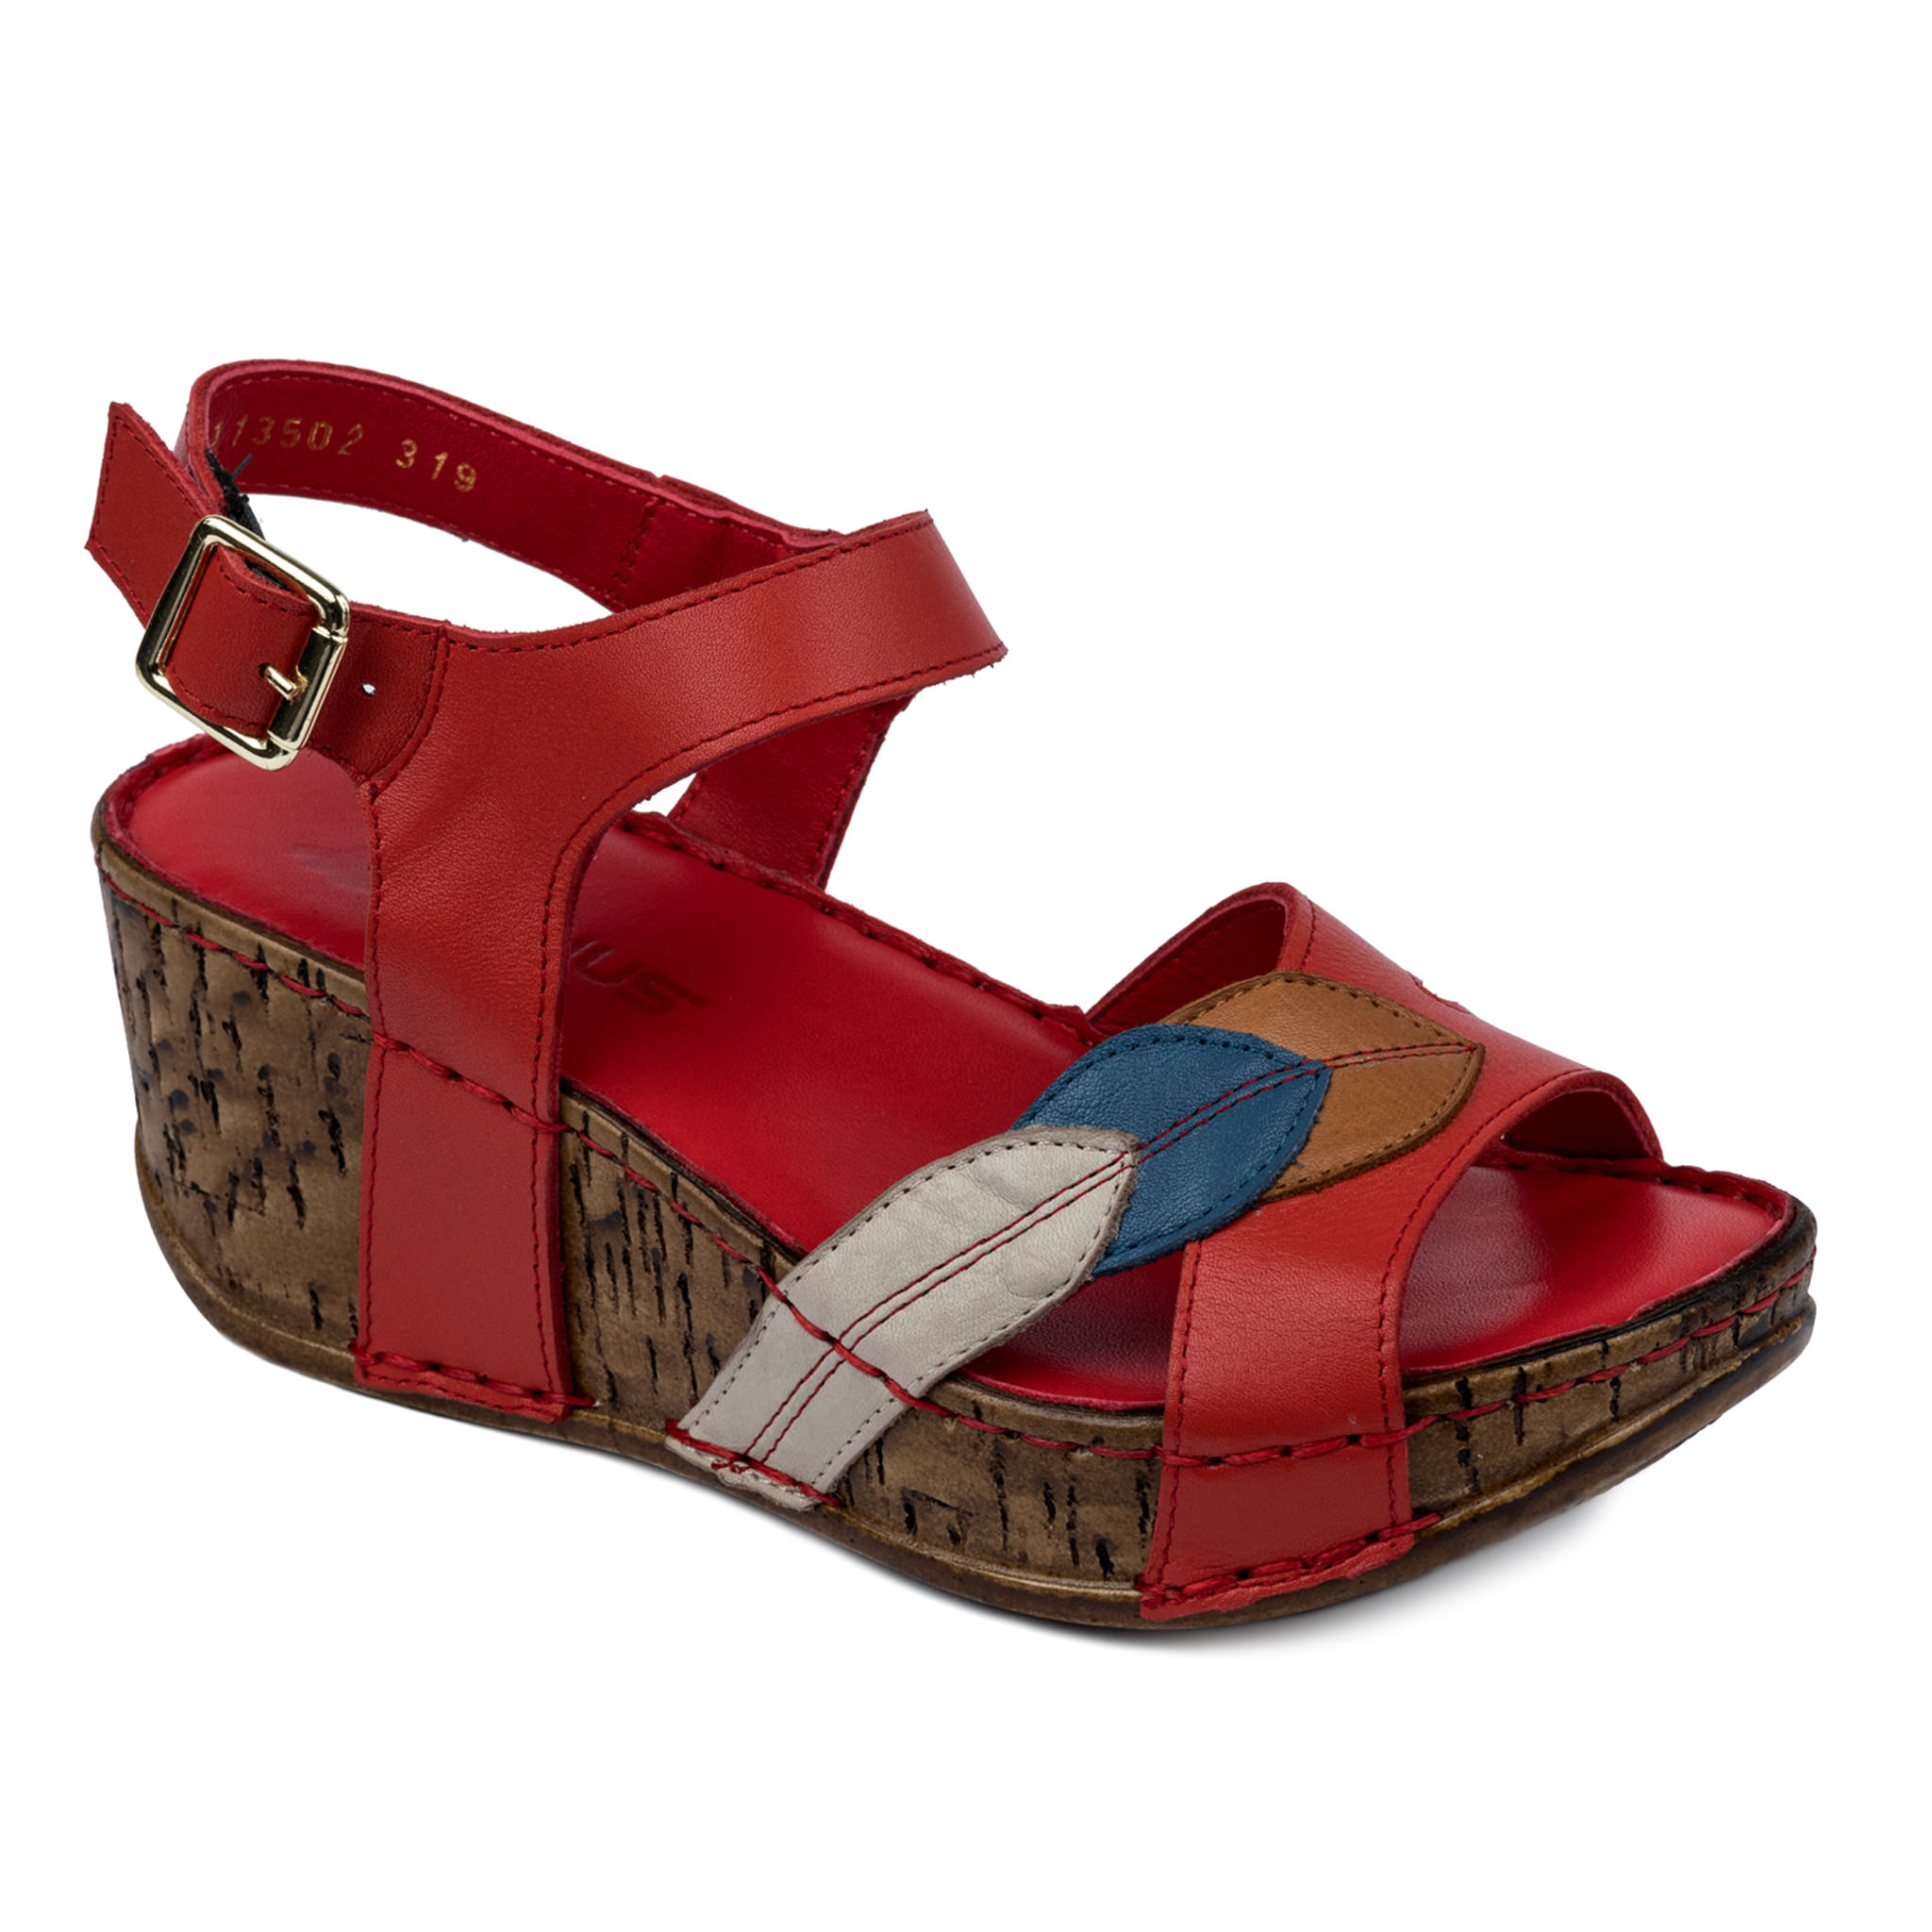 Leather sandals A232 - RED